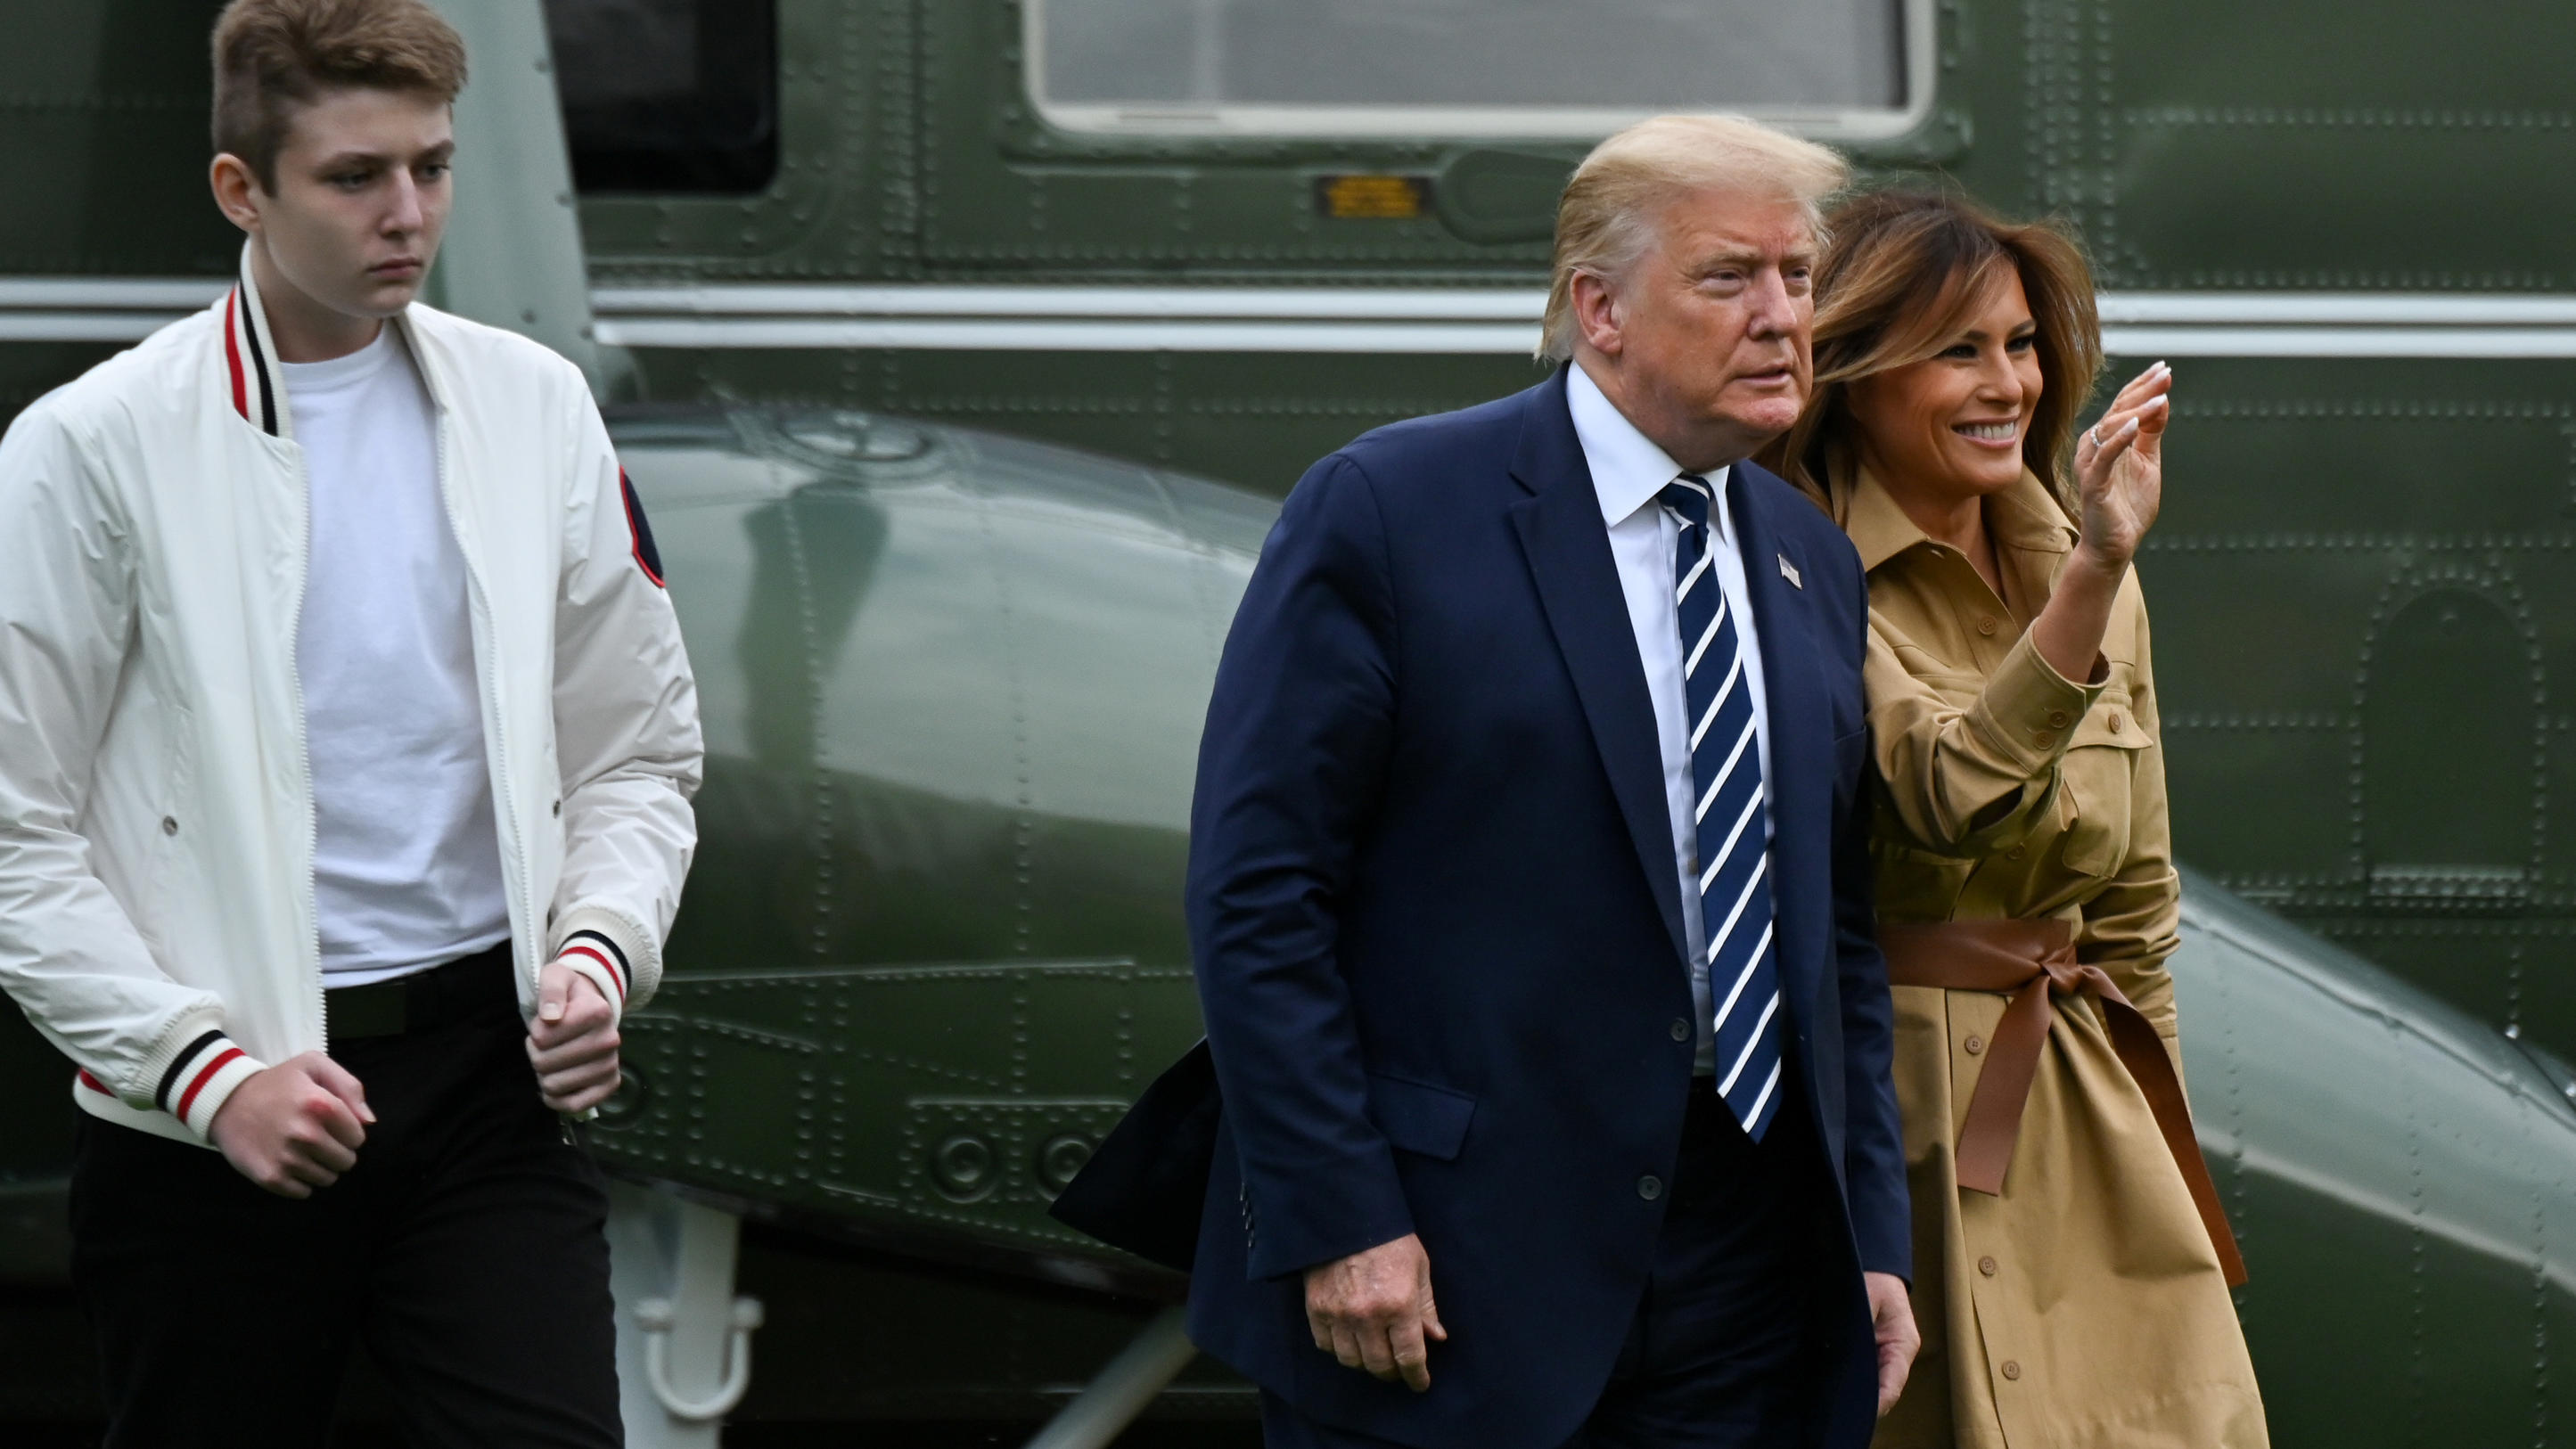 U.S. President Donald Trump, First Lady Melania Trump and their son Barron walk to the White House from Marine One in Washington, U.S. August 16, 2020. REUTERS/Erin Scott